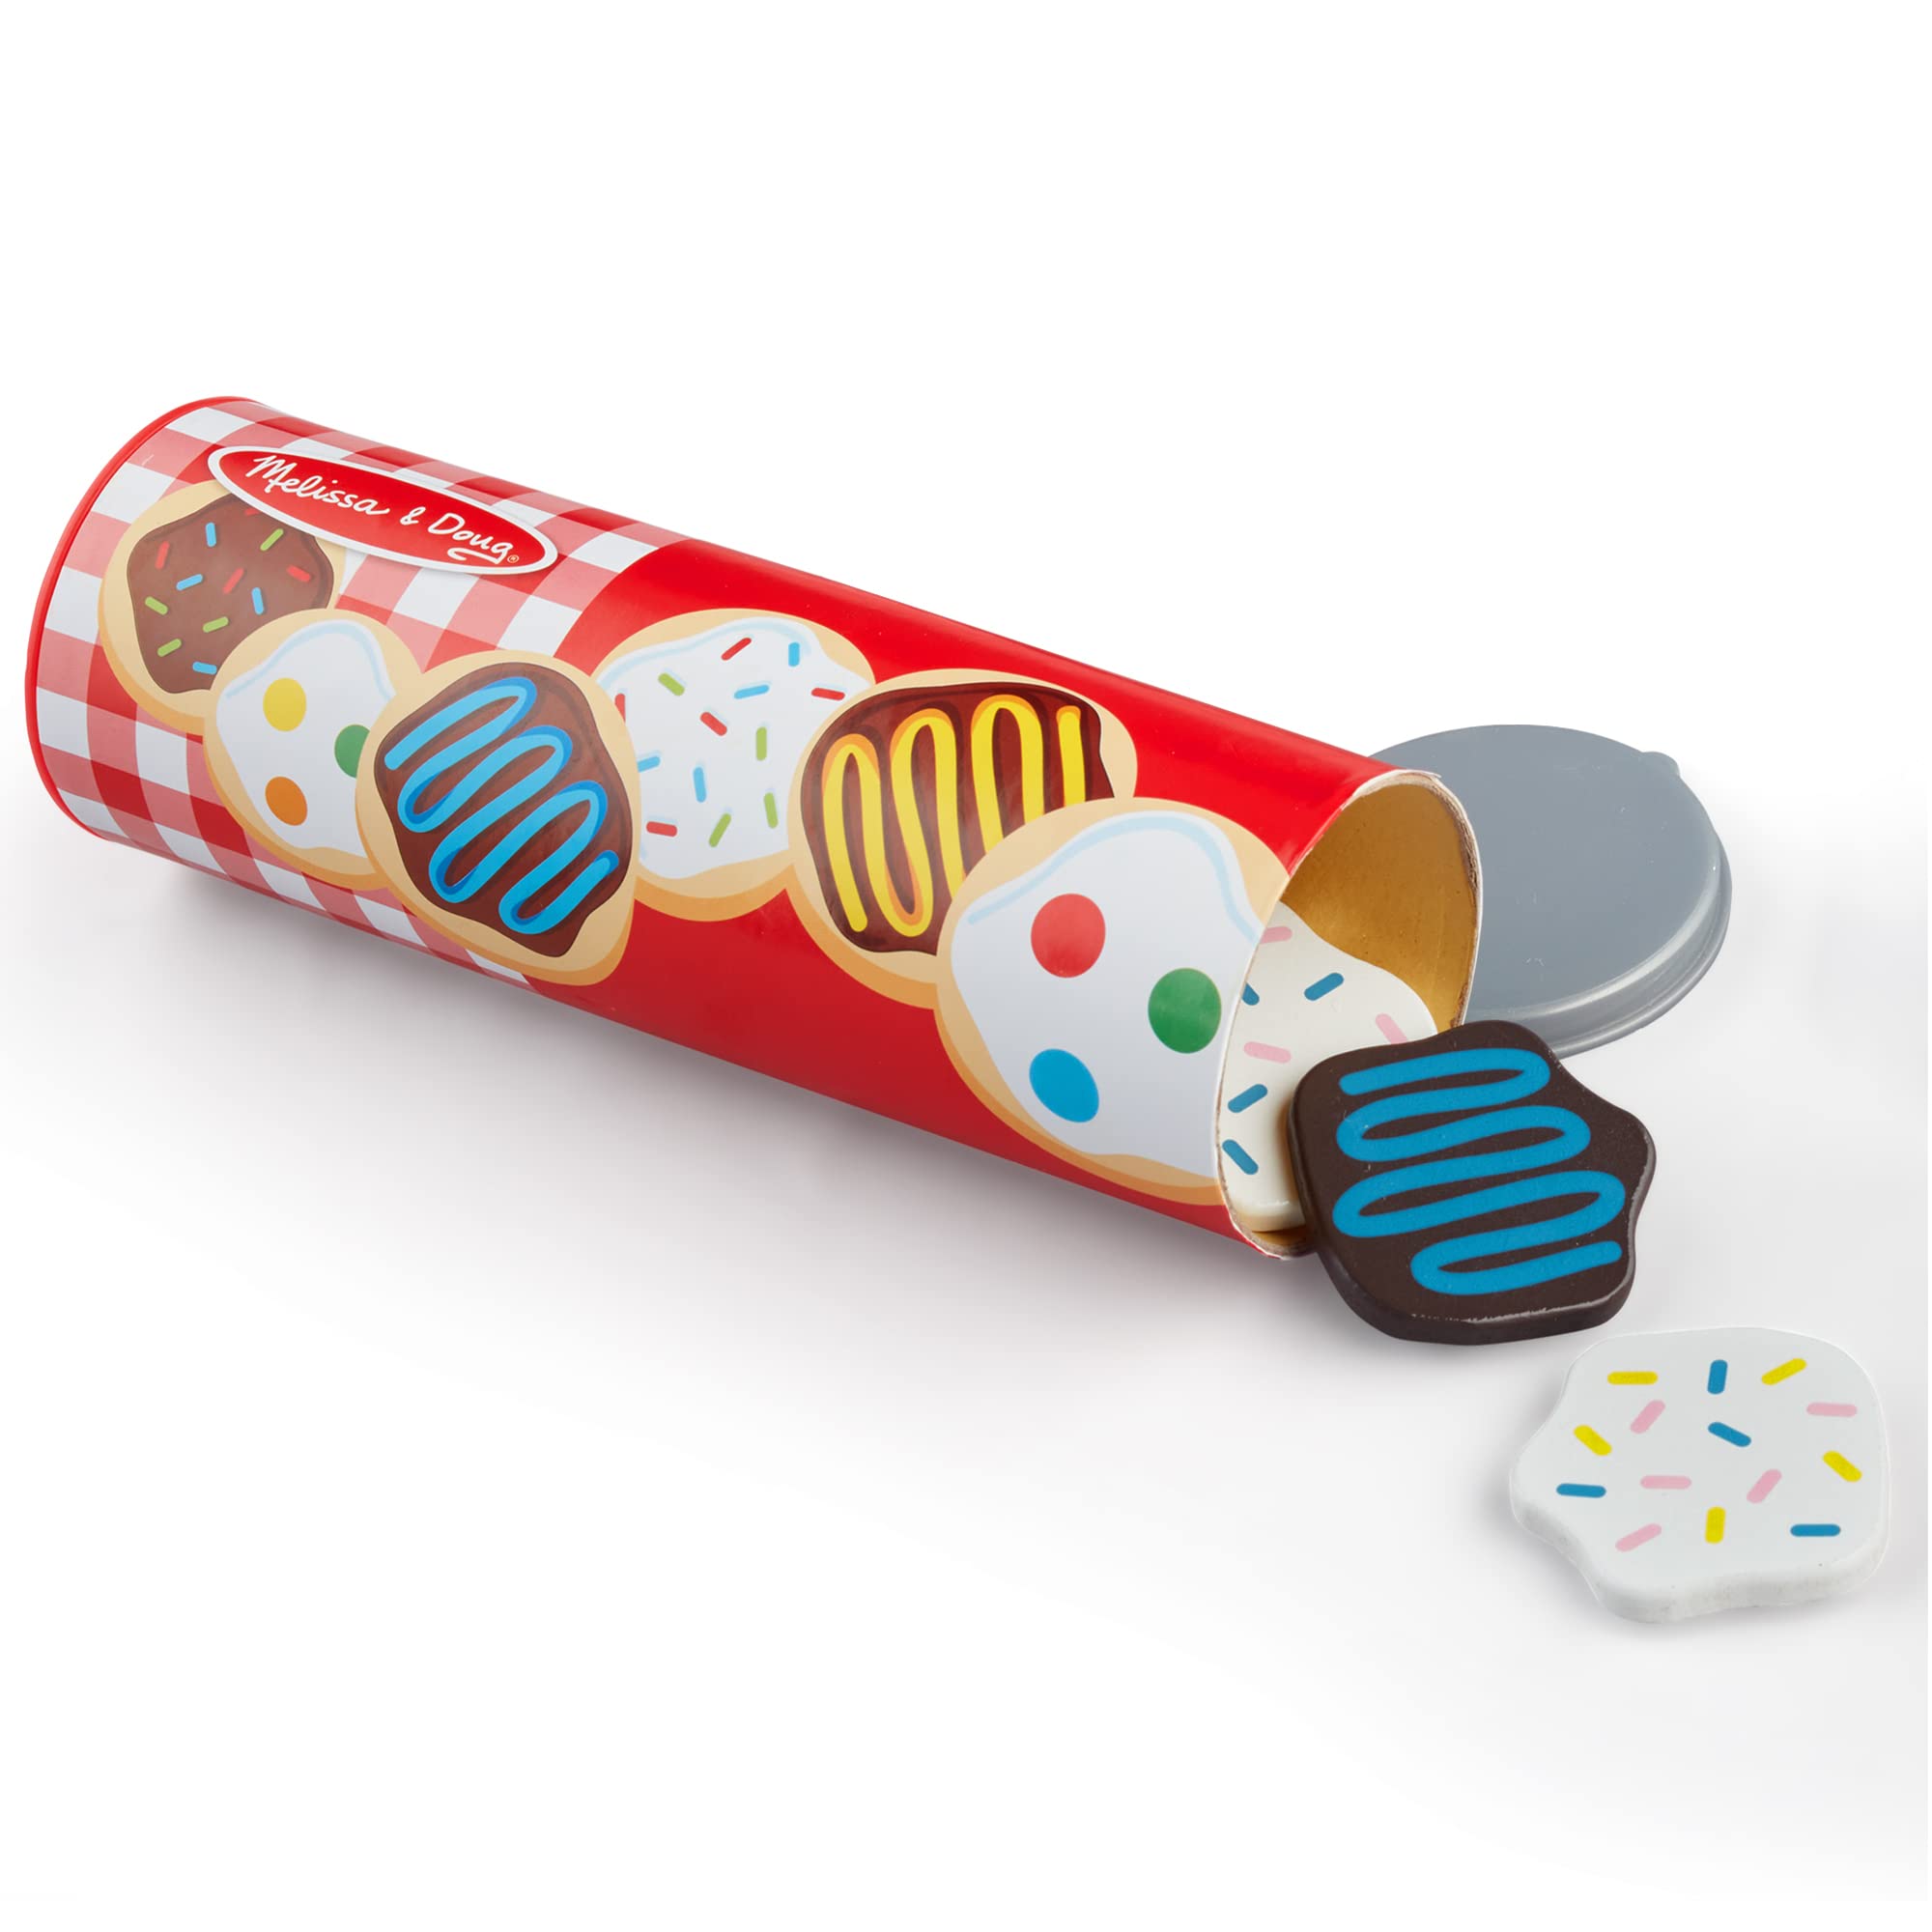 Melissa & Doug Slice and Bake Wooden Cookie Play Food Set - Pretend Cookies And Baking Sheet, Wooden Play Food Set, Toy Baking Set For Kids Ages 3+